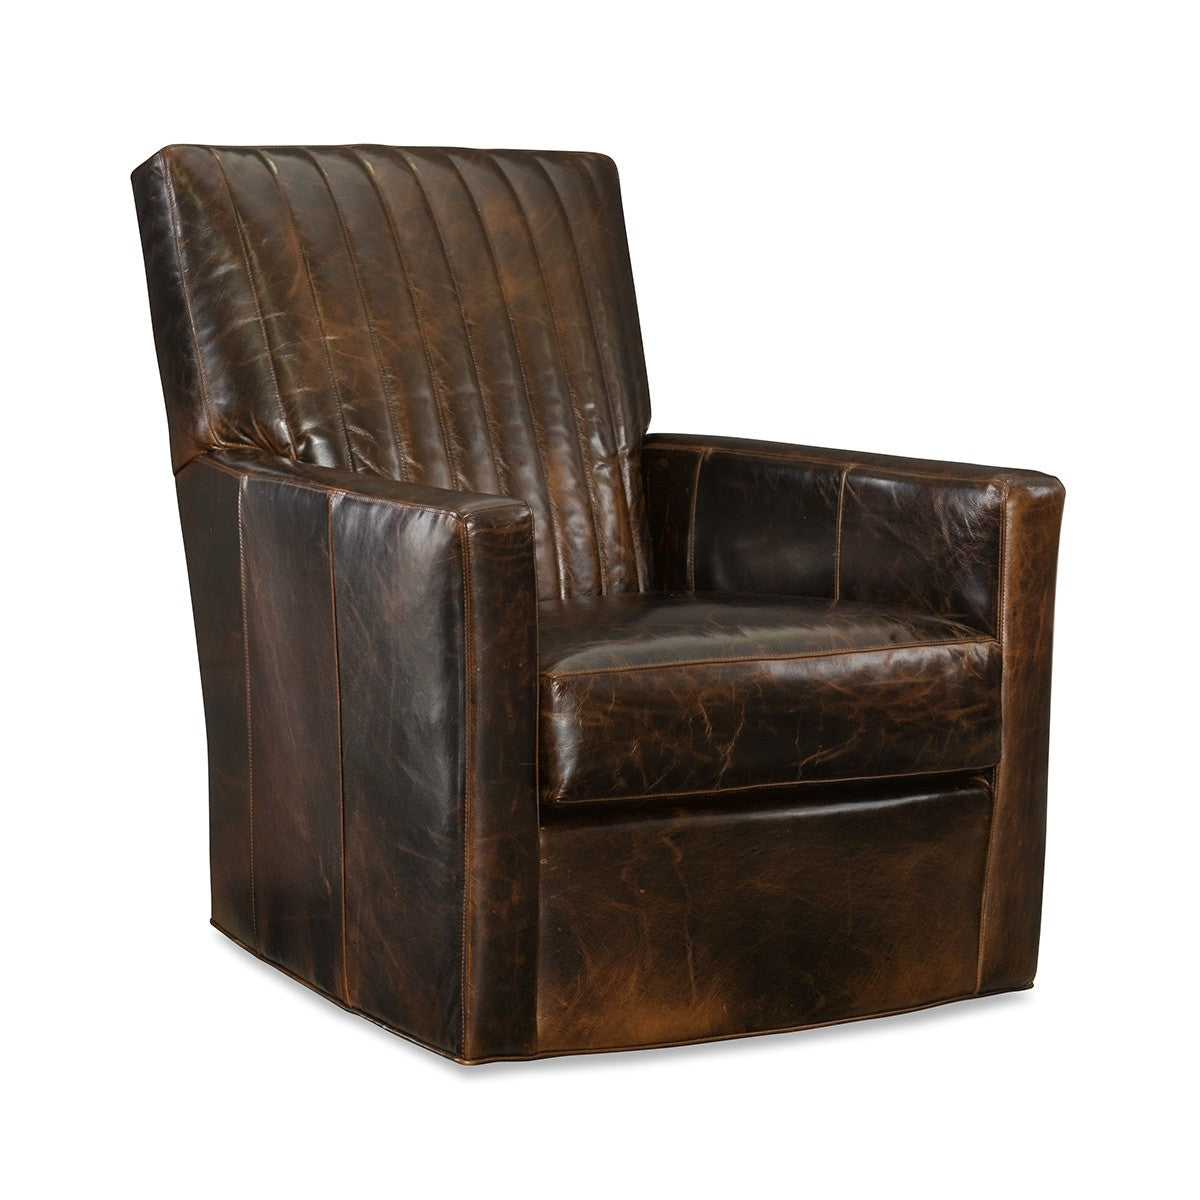 Malcolm Leather Channel Back Swivel Chair